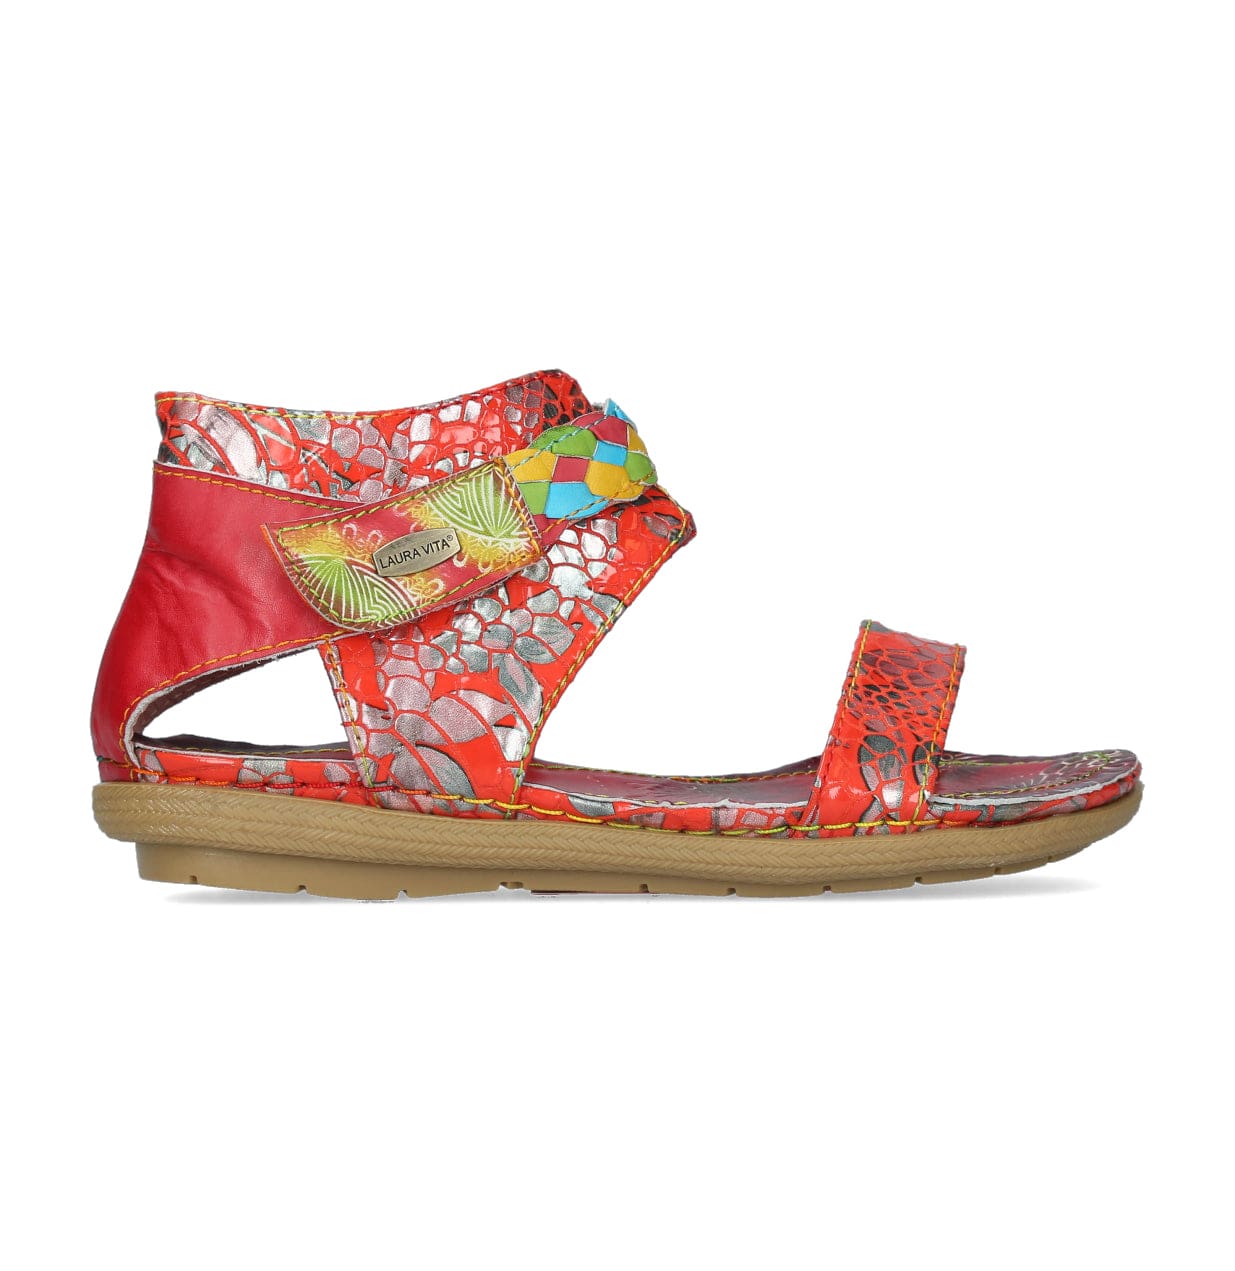 Chaussures LIENO 04 - 35 / Rouge - Sandale